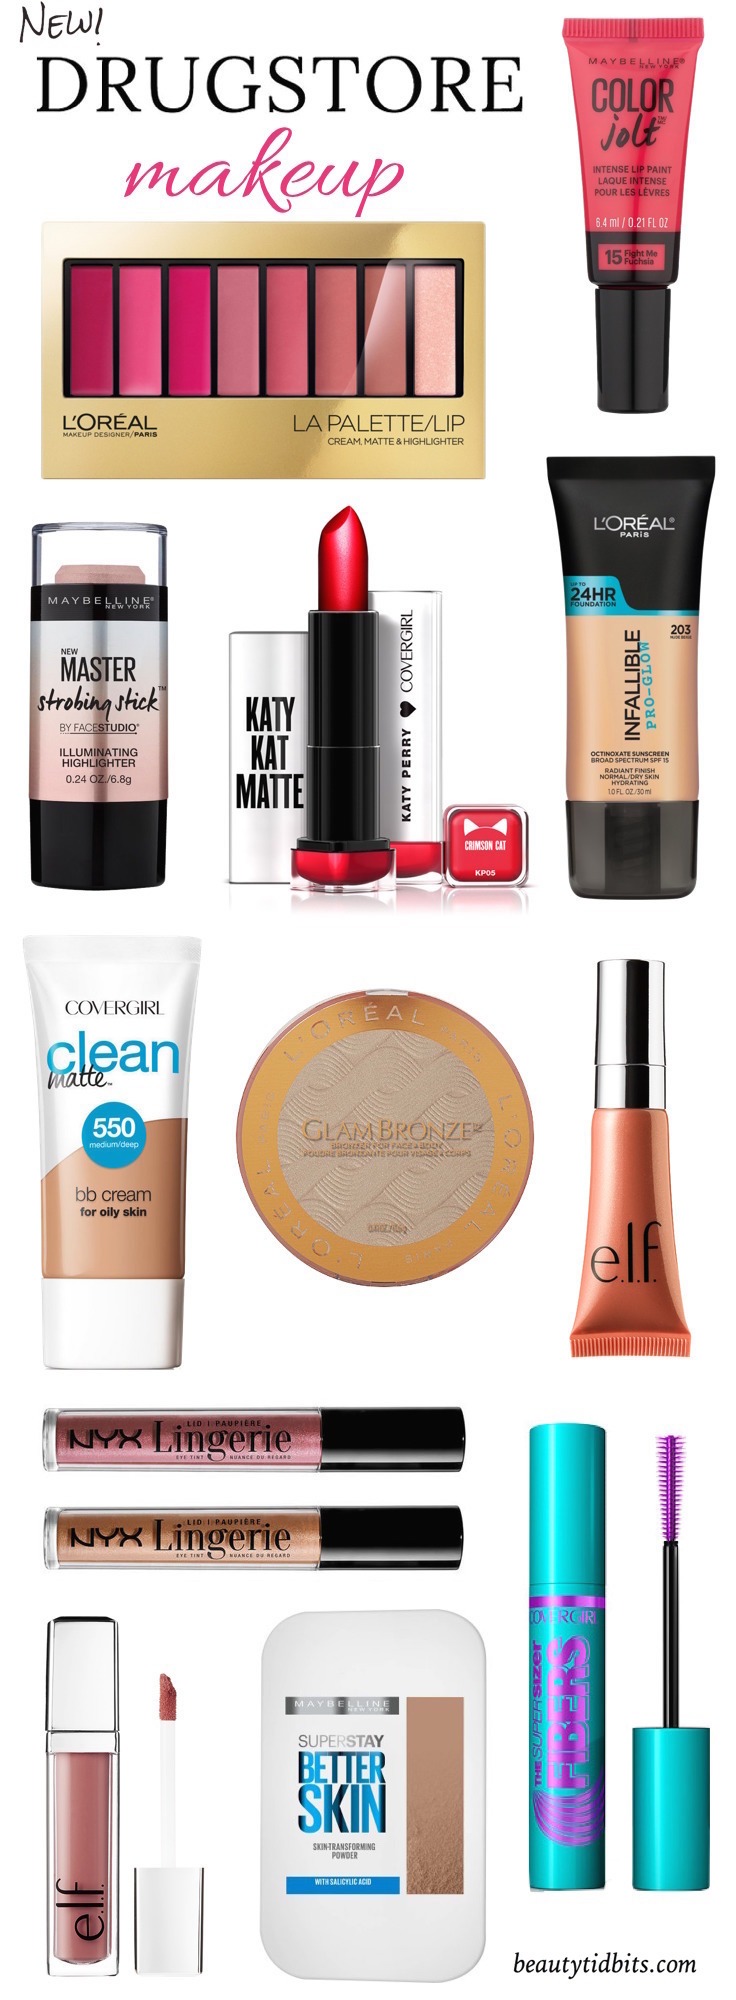 12 Exciting New Drugstore Makeup Products You Need to Know About ...